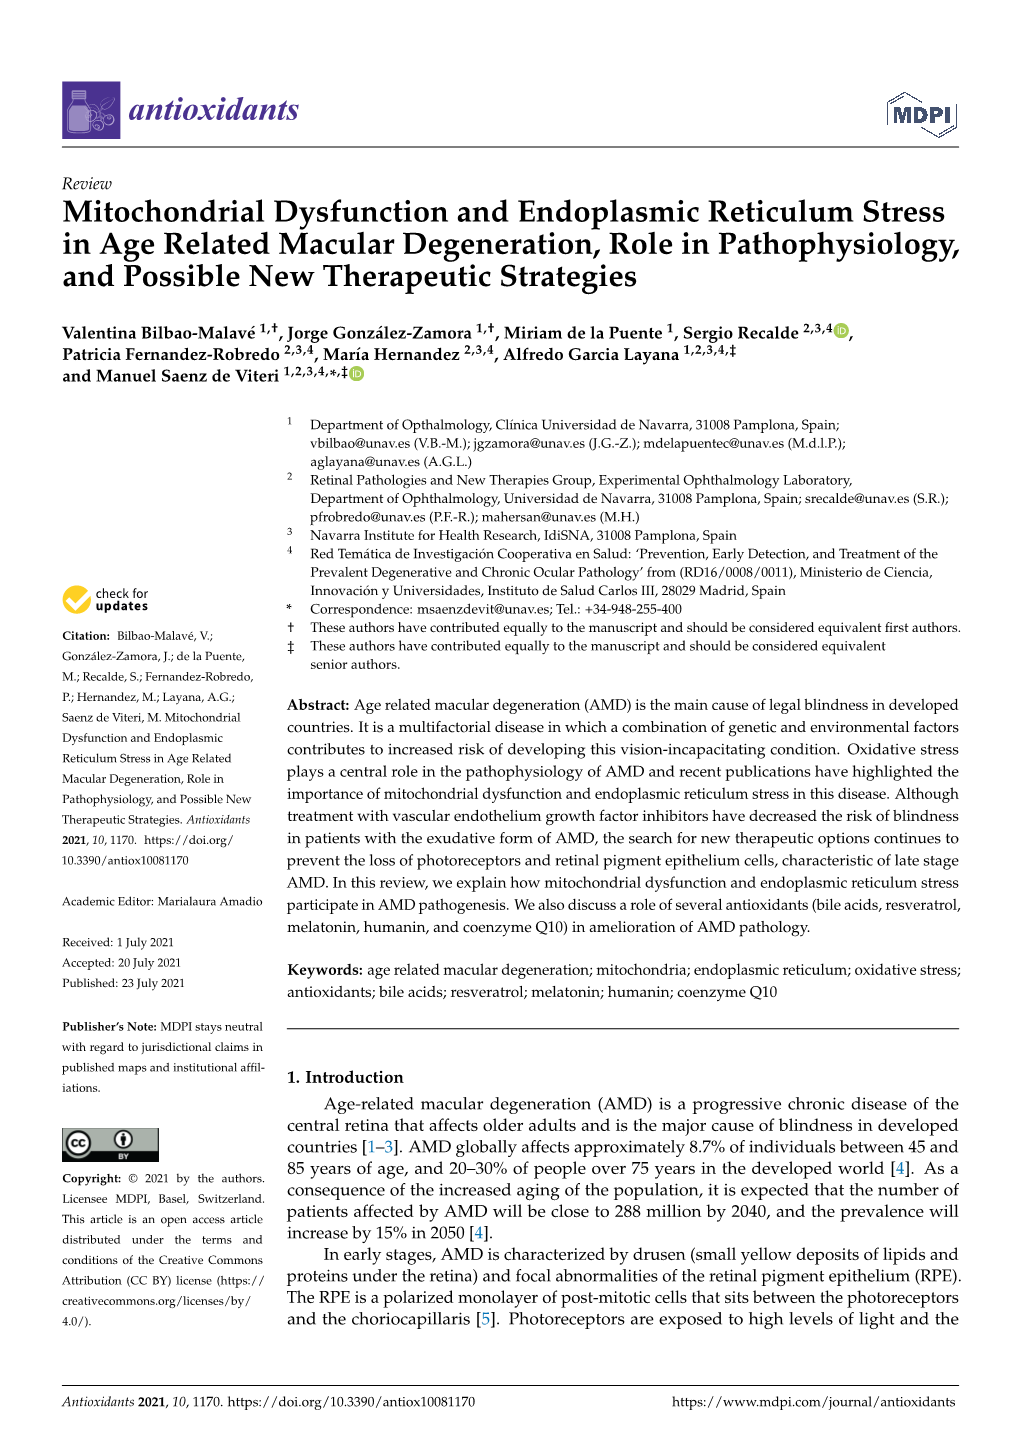 Mitochondrial Dysfunction and Endoplasmic Reticulum Stress in Age Related Macular Degeneration, Role in Pathophysiology, and Possible New Therapeutic Strategies